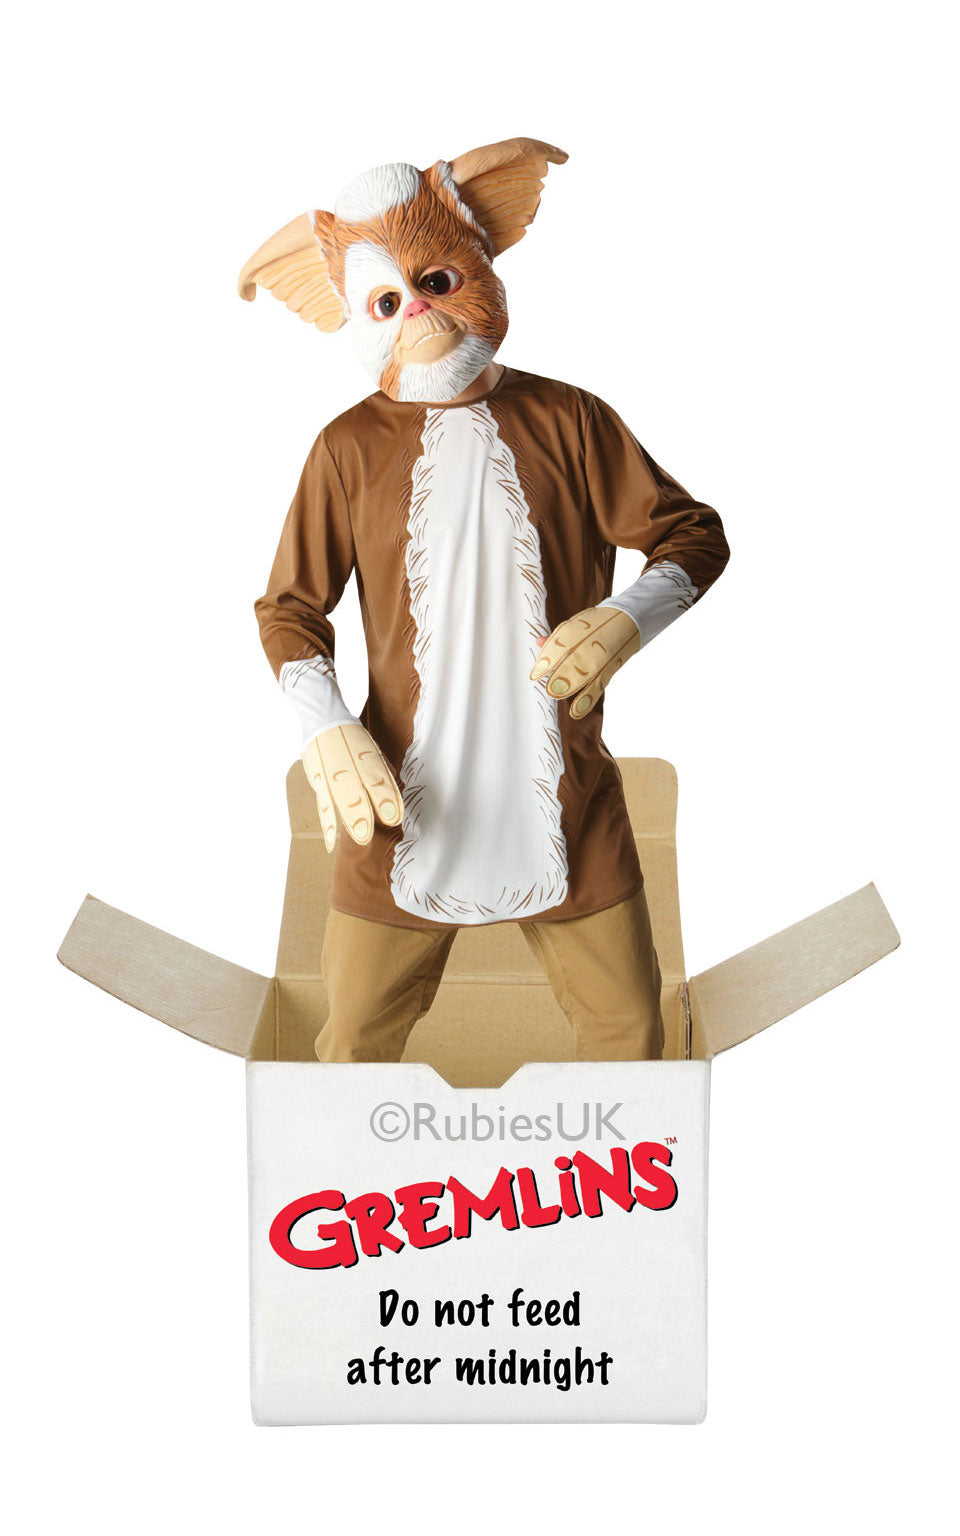 Adult Deluxe Gismo "Gremlins" Costume